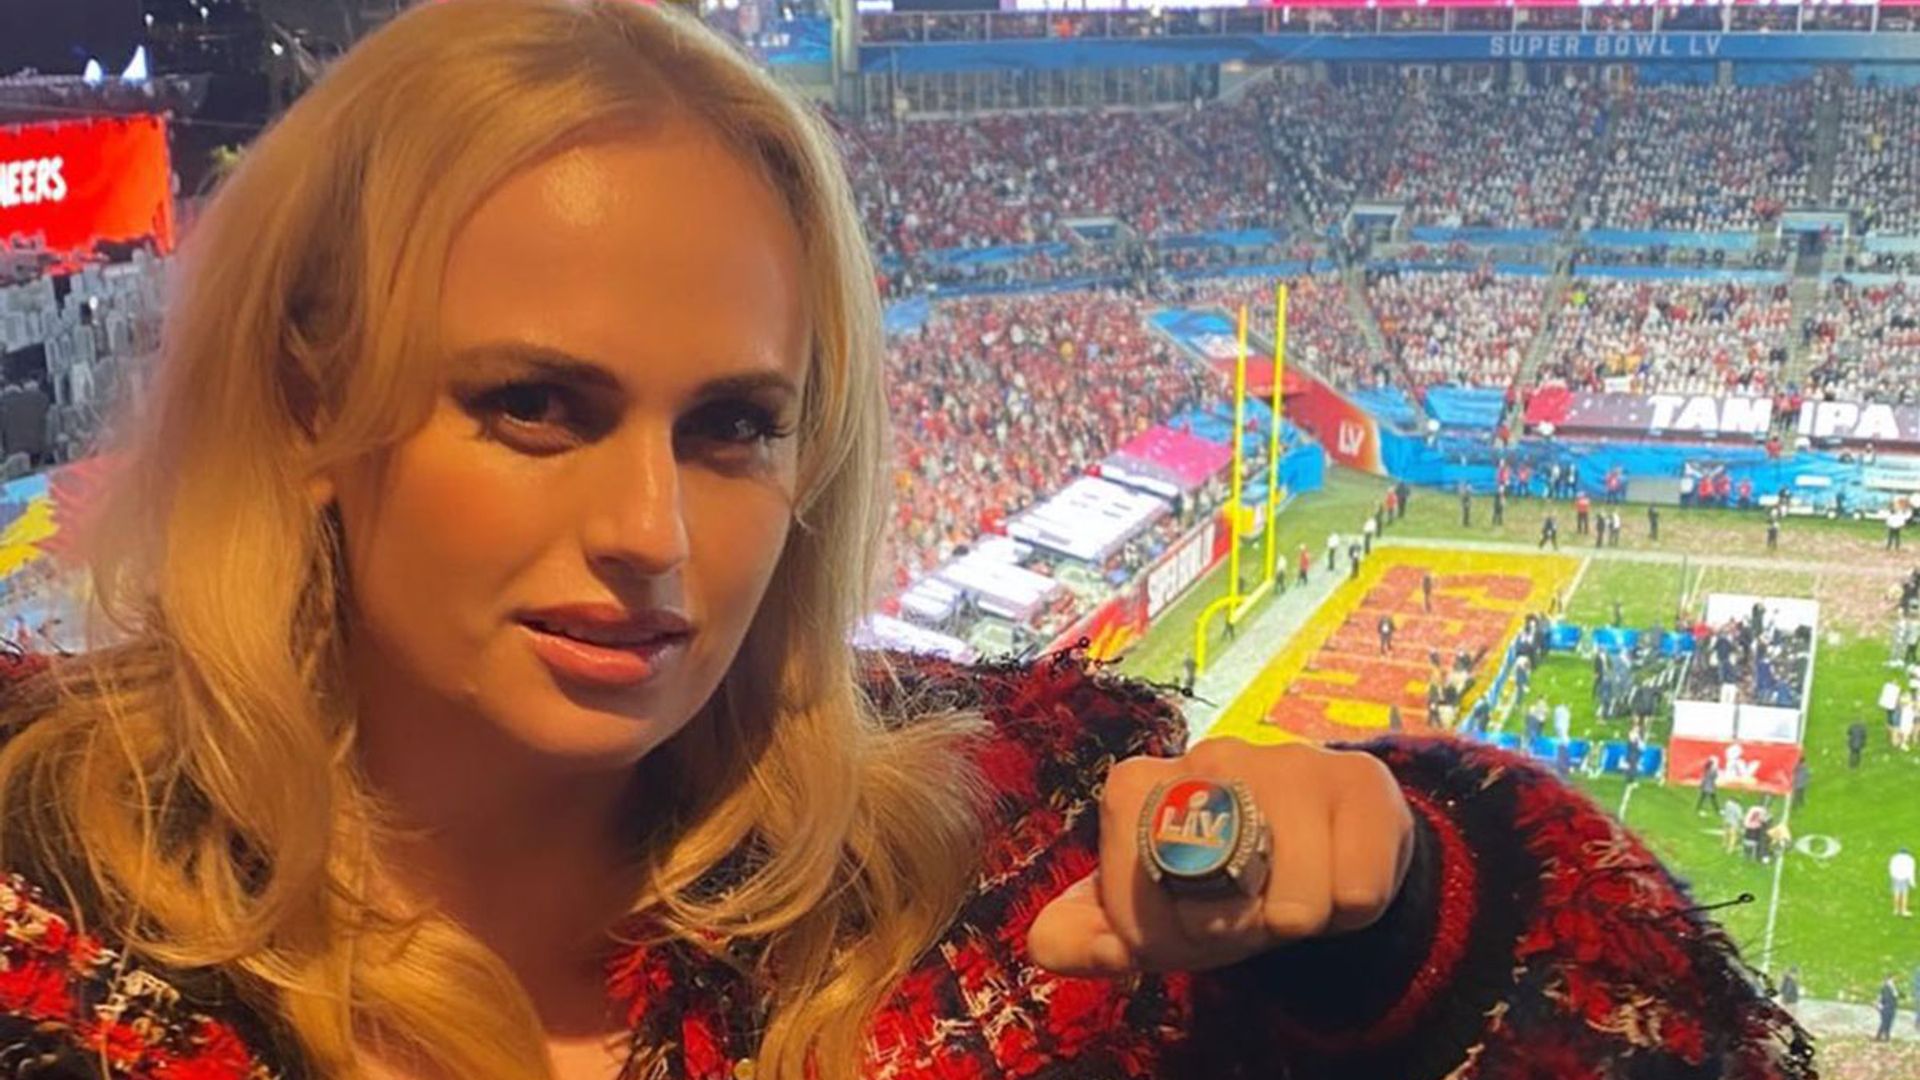 Rebel Wilson poses with 'husband' at Super Bowl days after Jacob Busch split